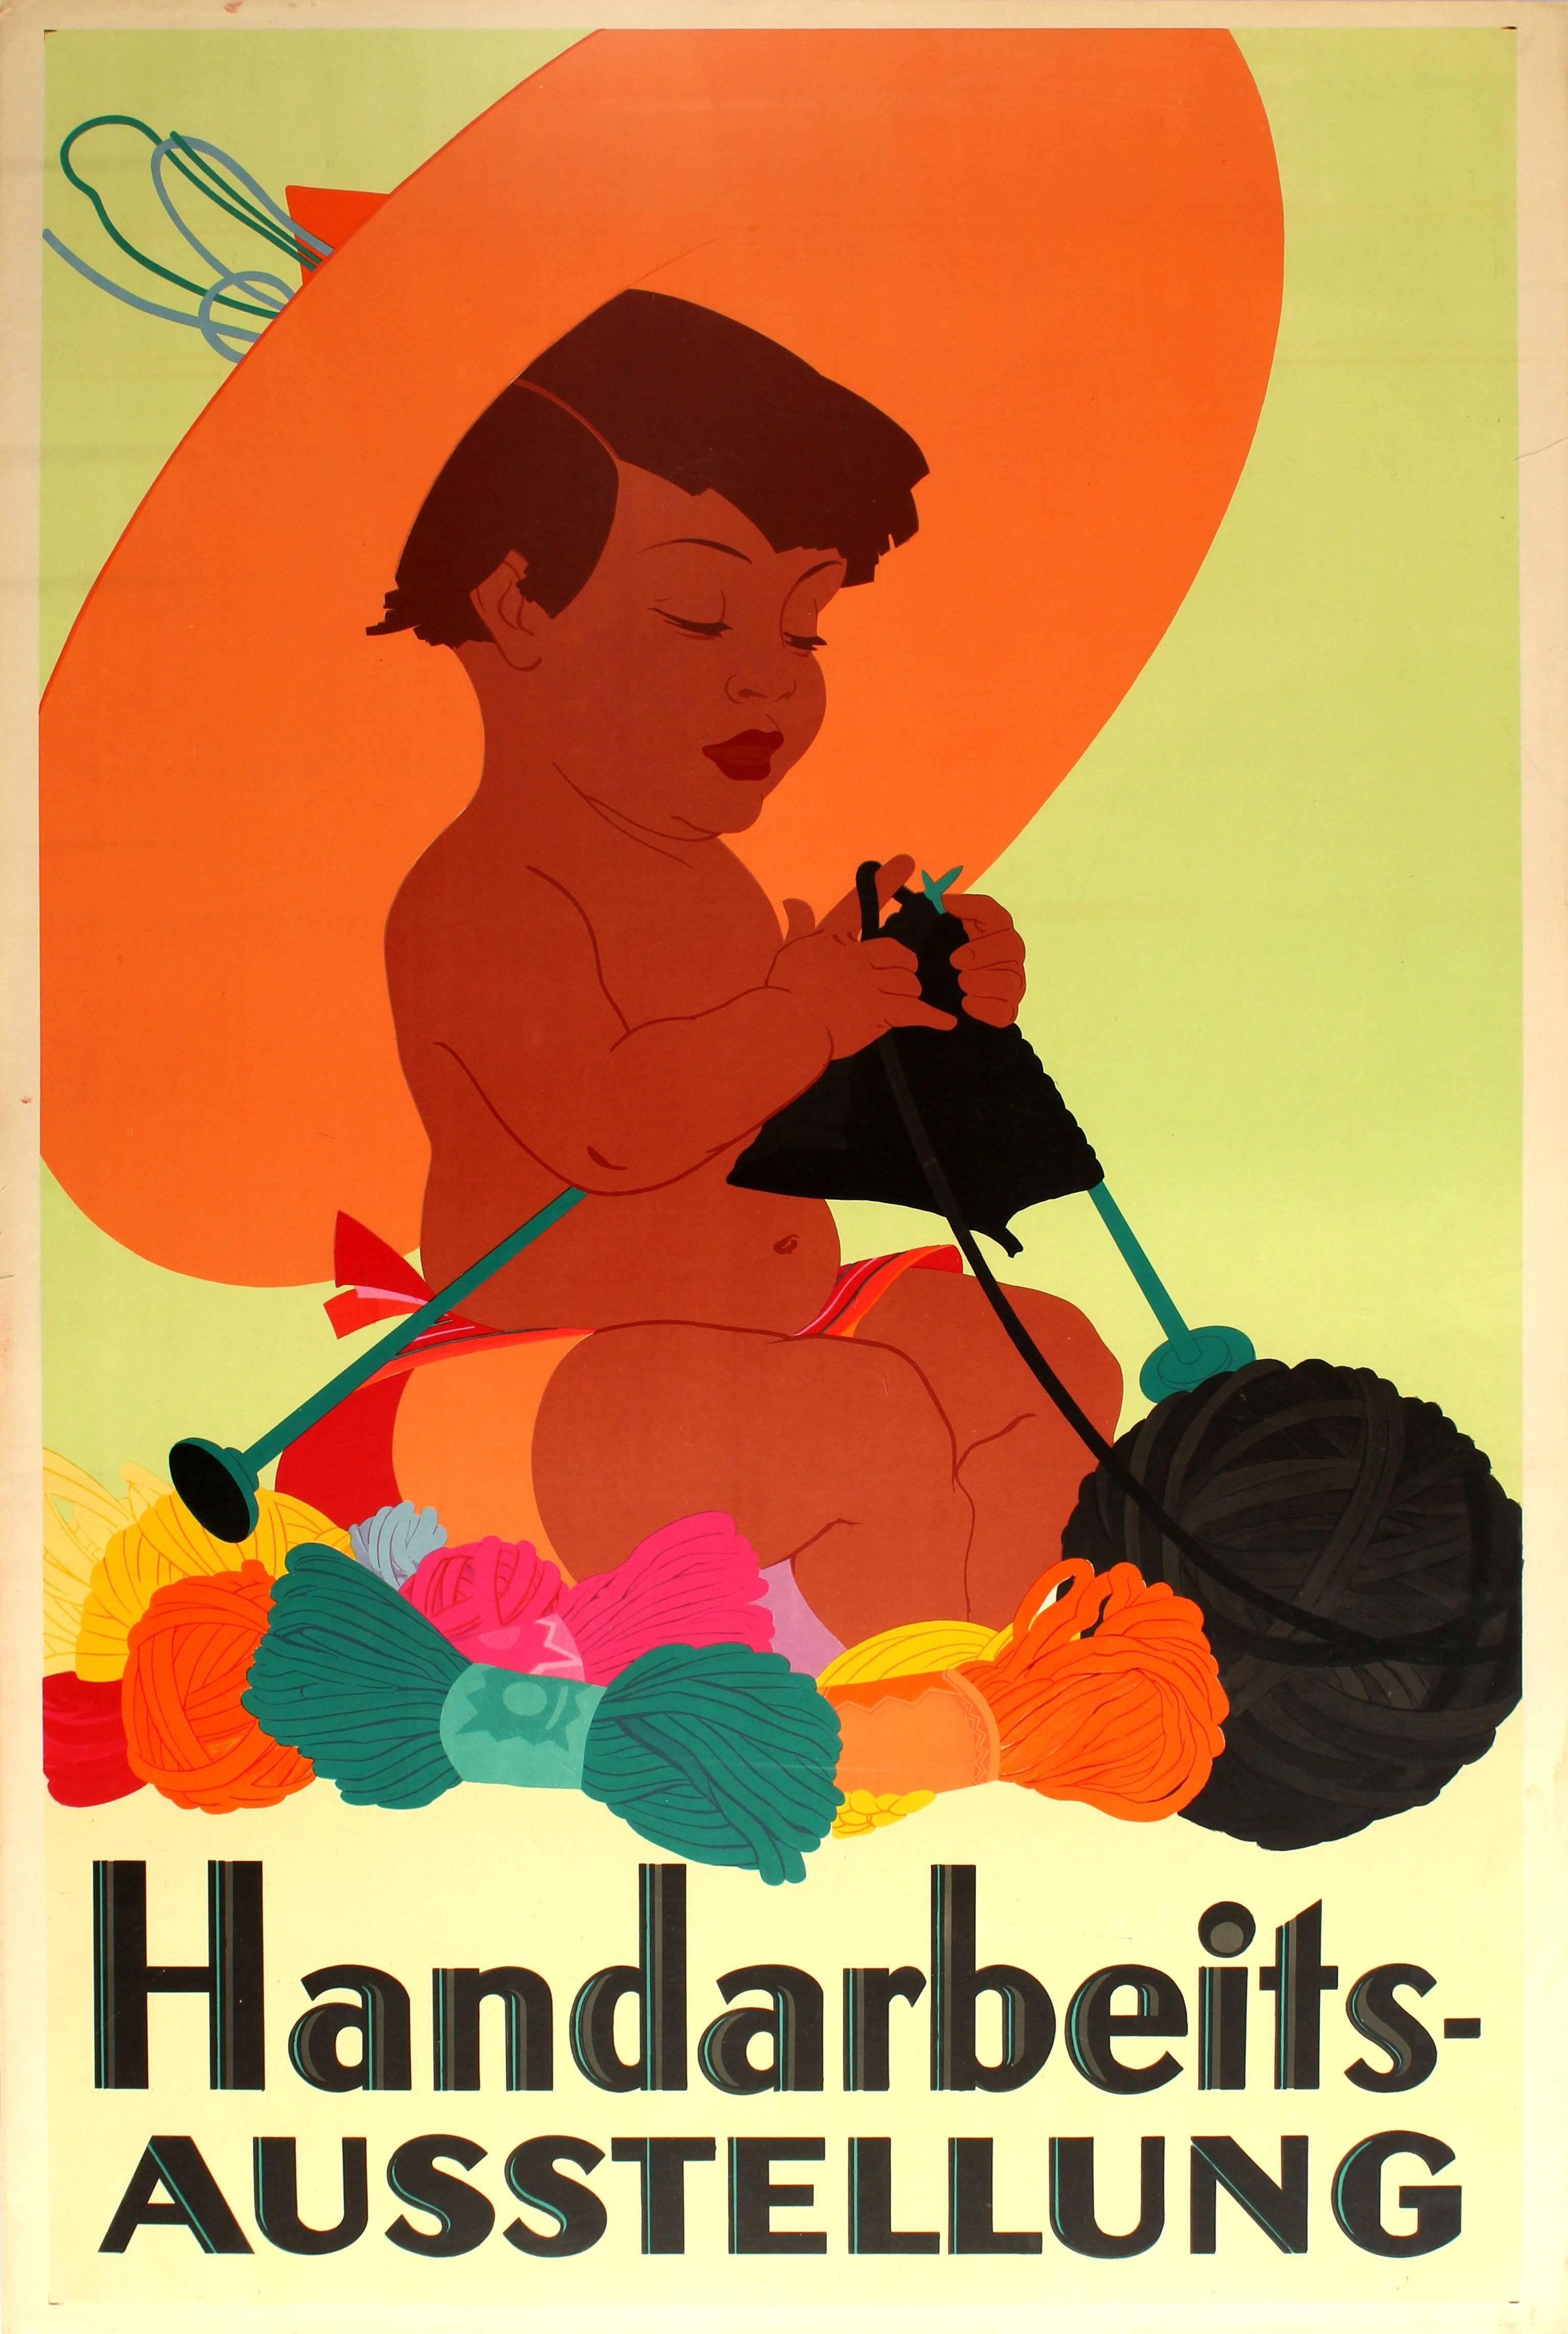 Unknown Print - Original Large Art Deco Poster For An Exhibition Of Handcrafts At KaDeWe Berlin